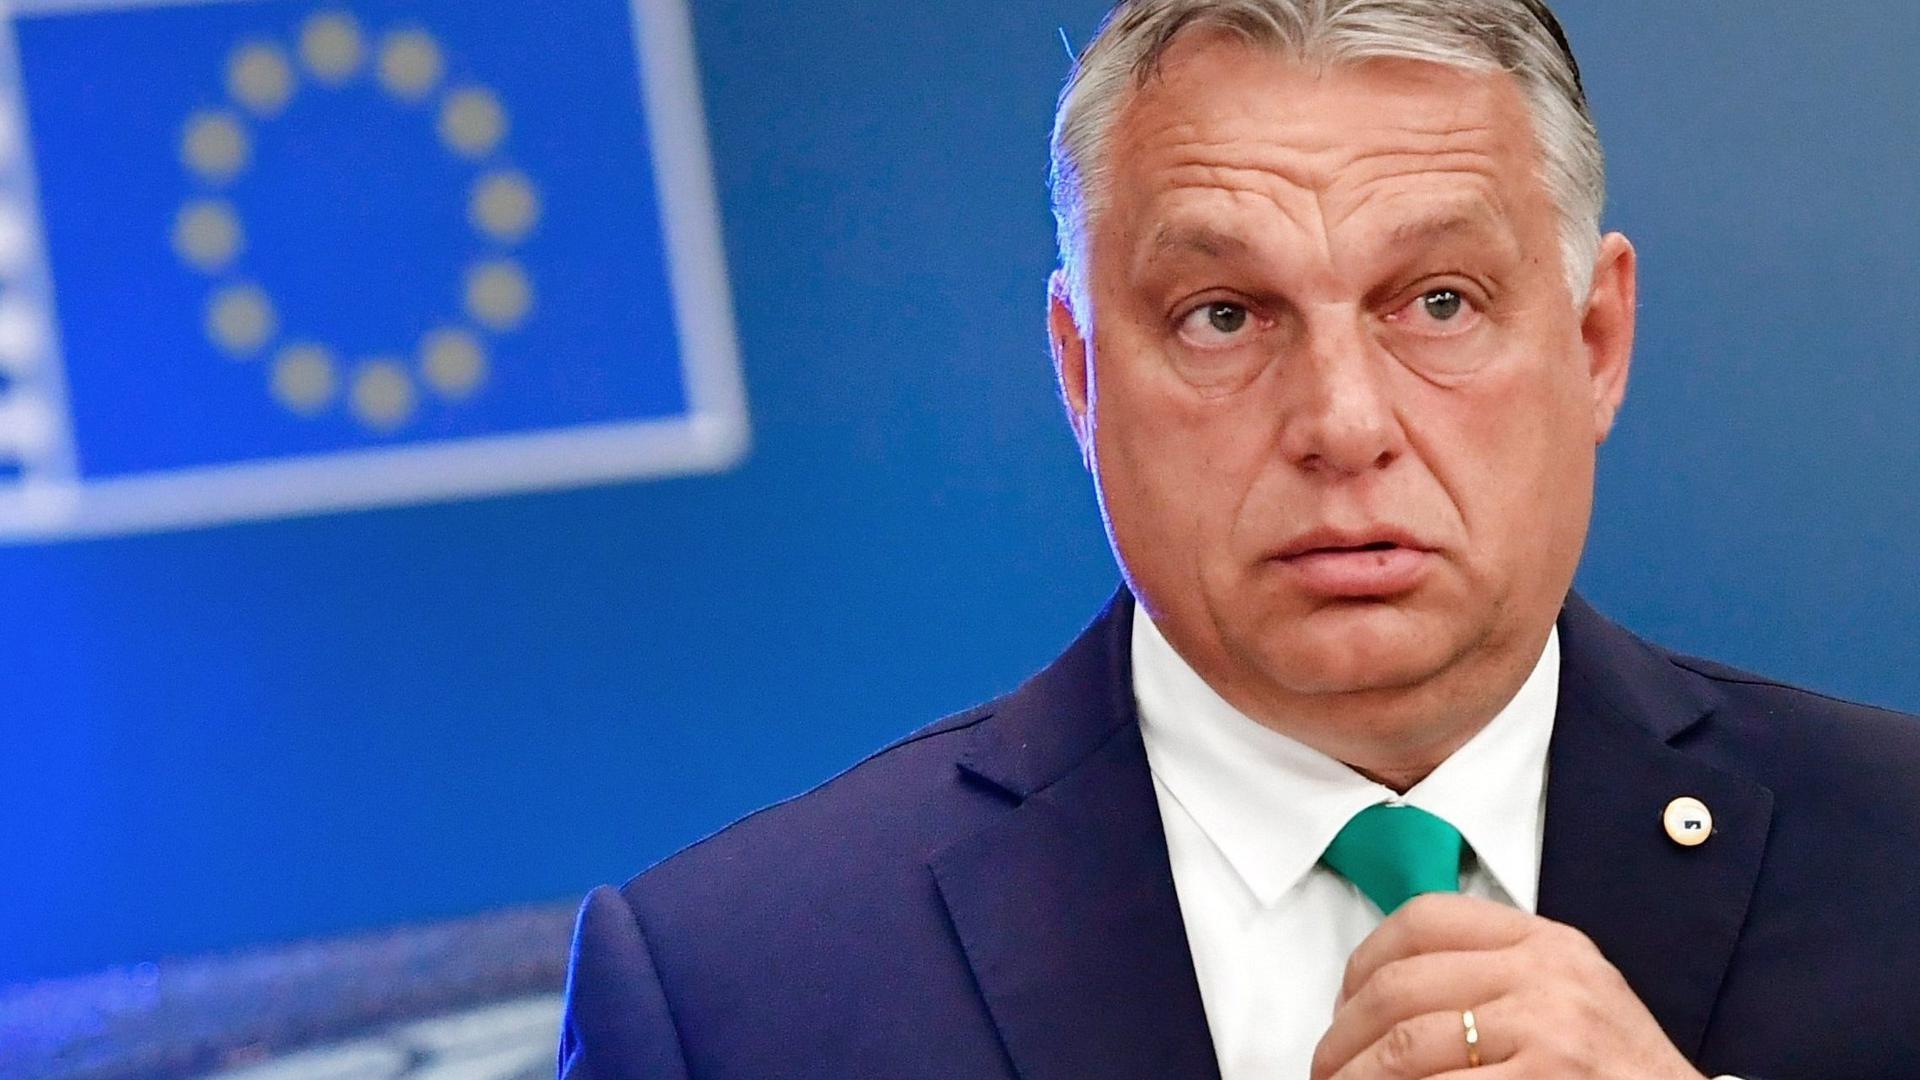 The EU has been at loggerheads with Hungary's government, led by Prime Minister Viktor Orbán